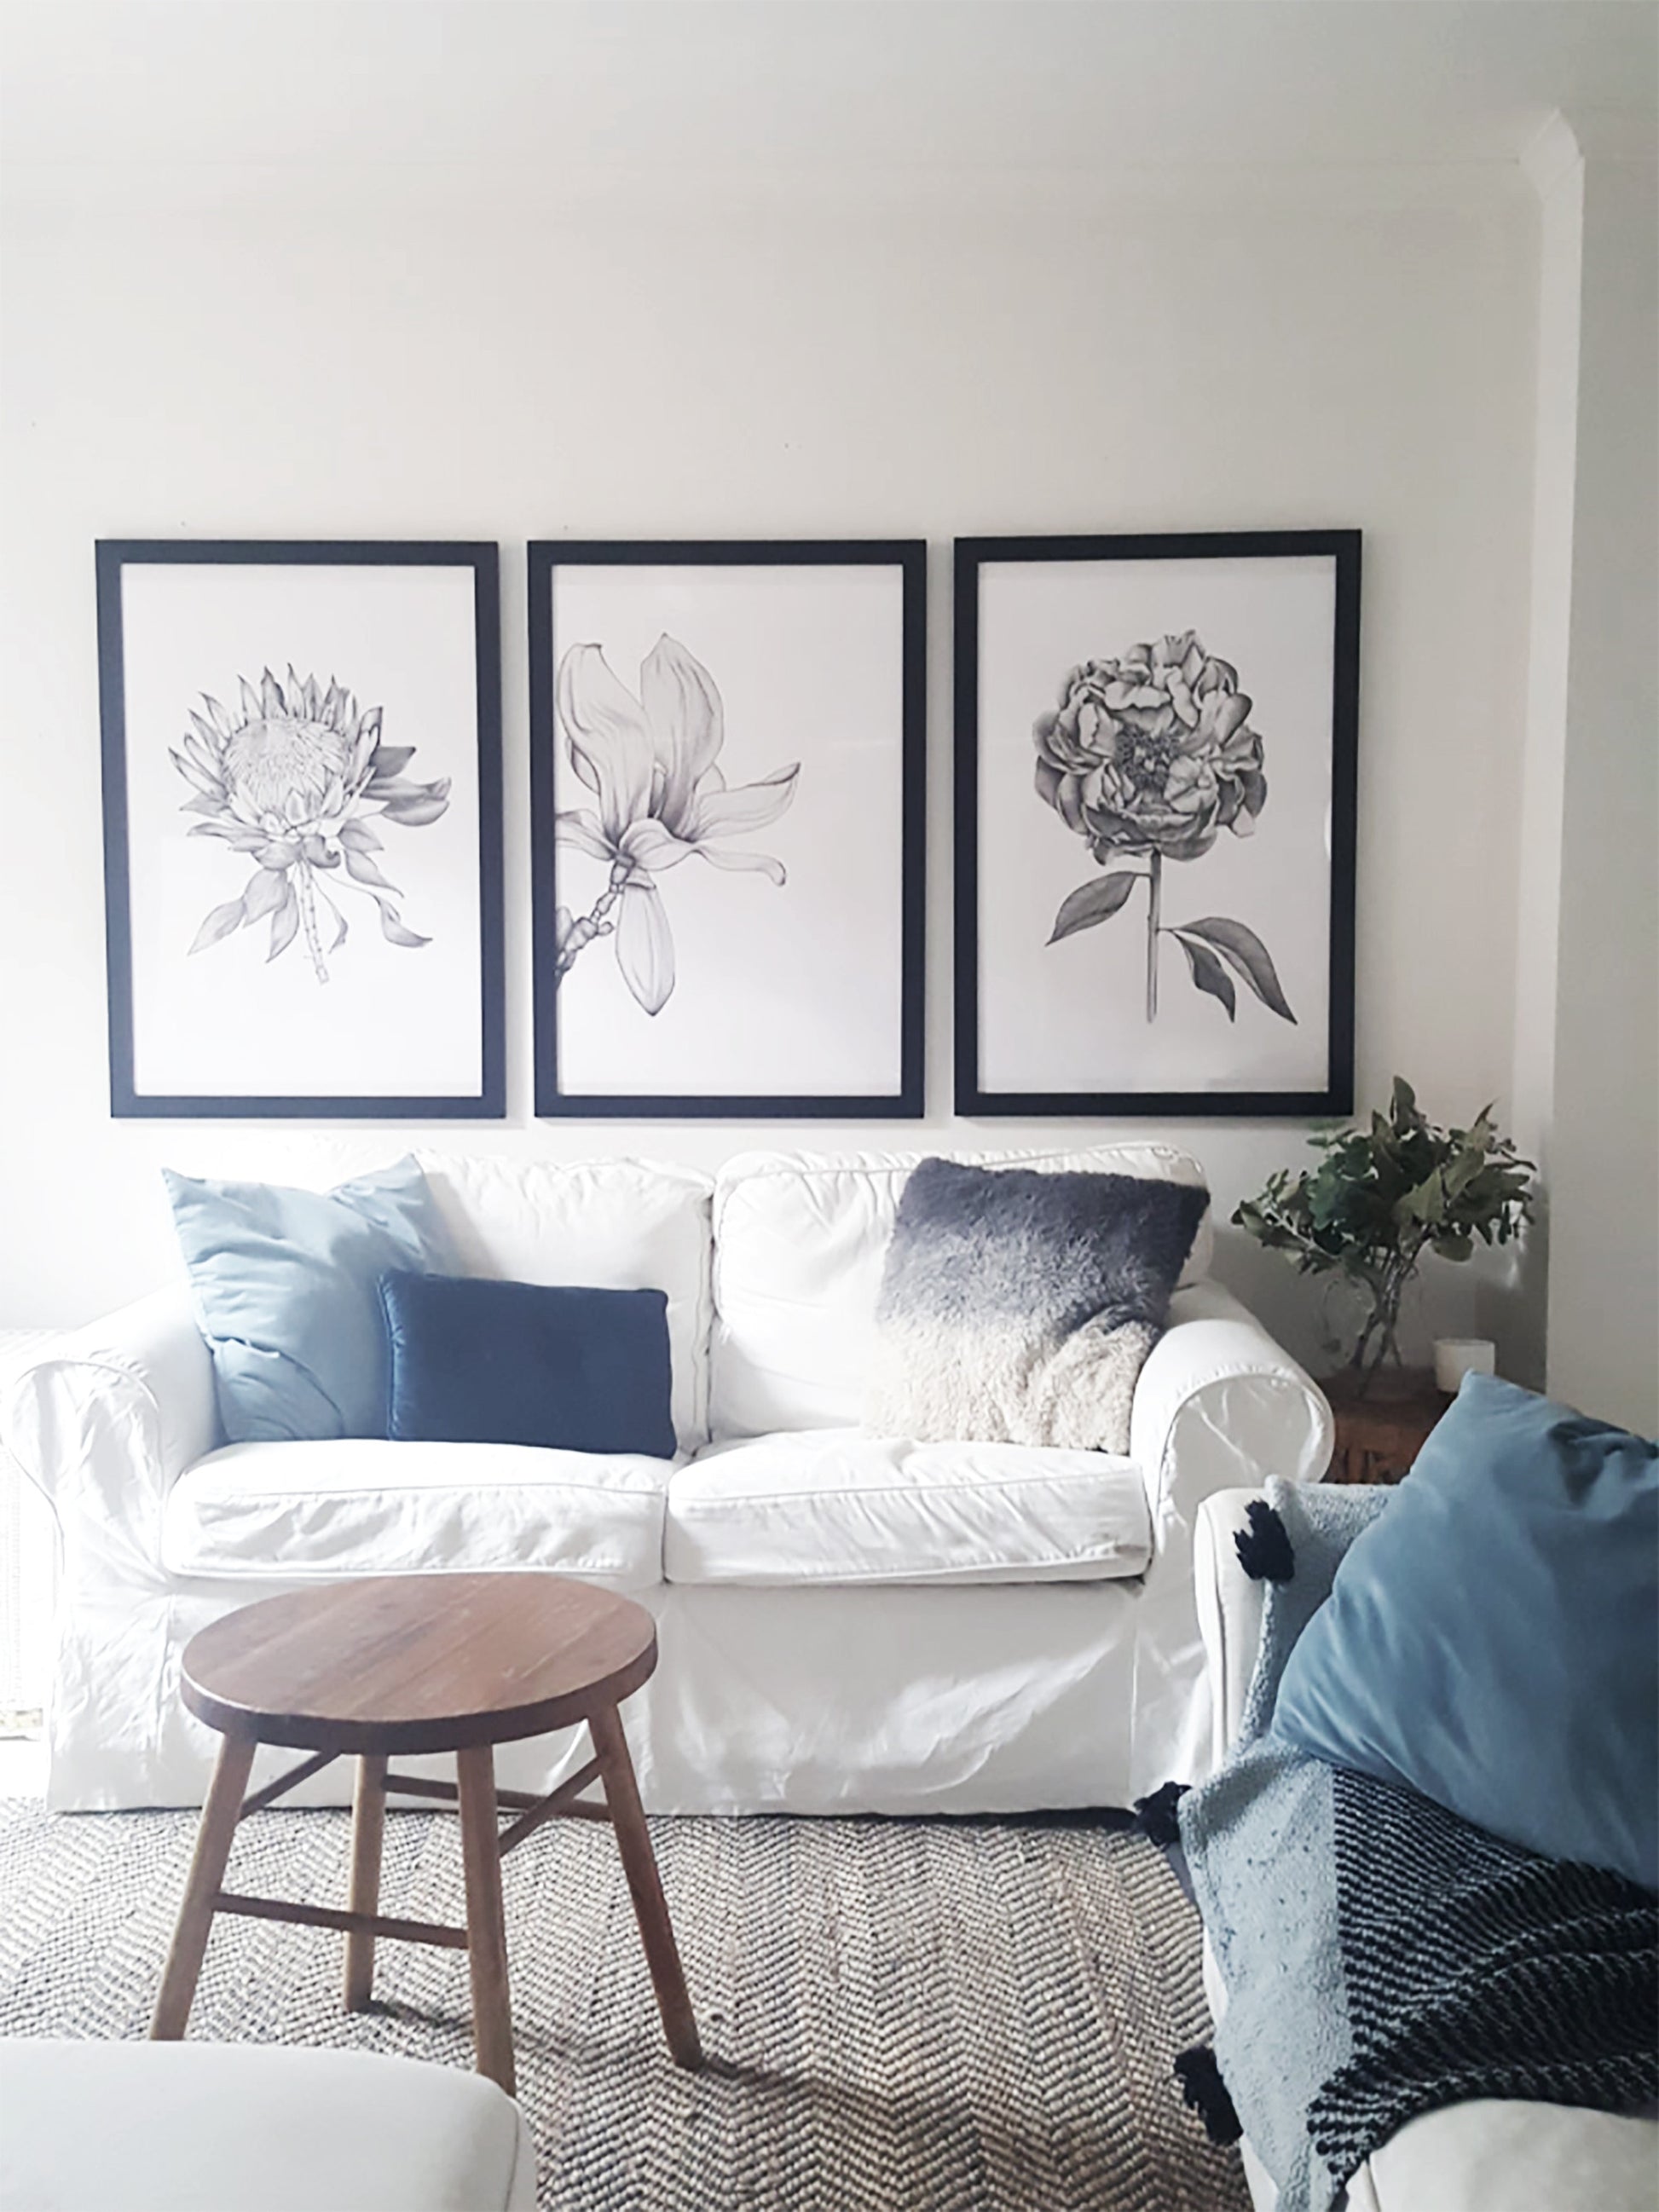 set of 3 prints offer. Save $30 on the Protea, Magnolia and Peony illustrations